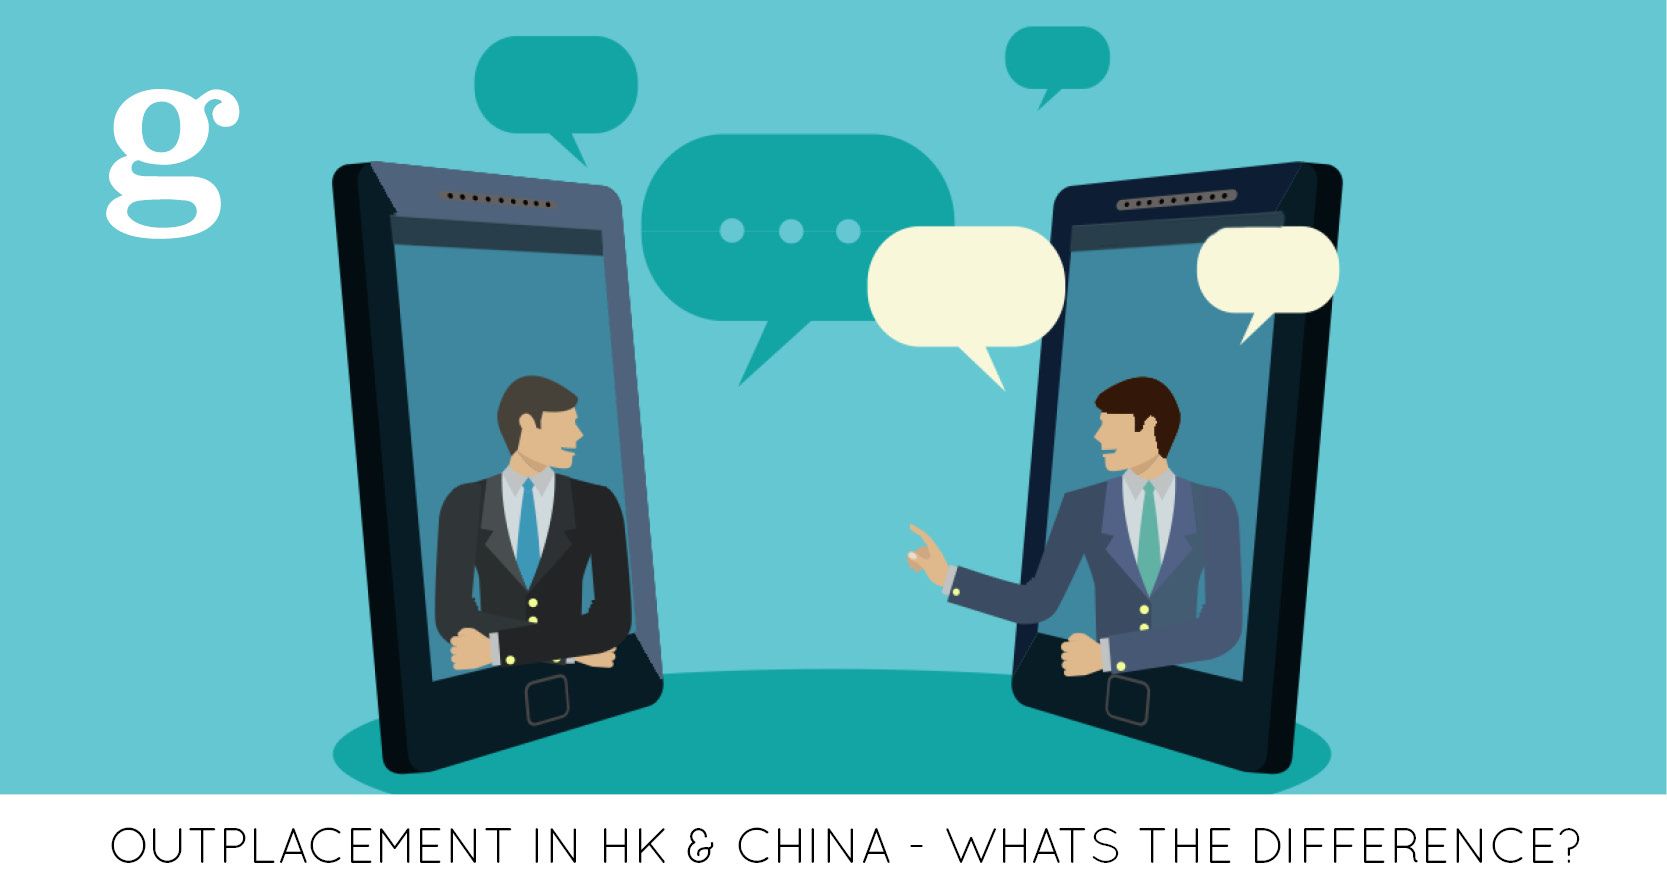 Outplacement in Hong Kong and China - What's the difference?